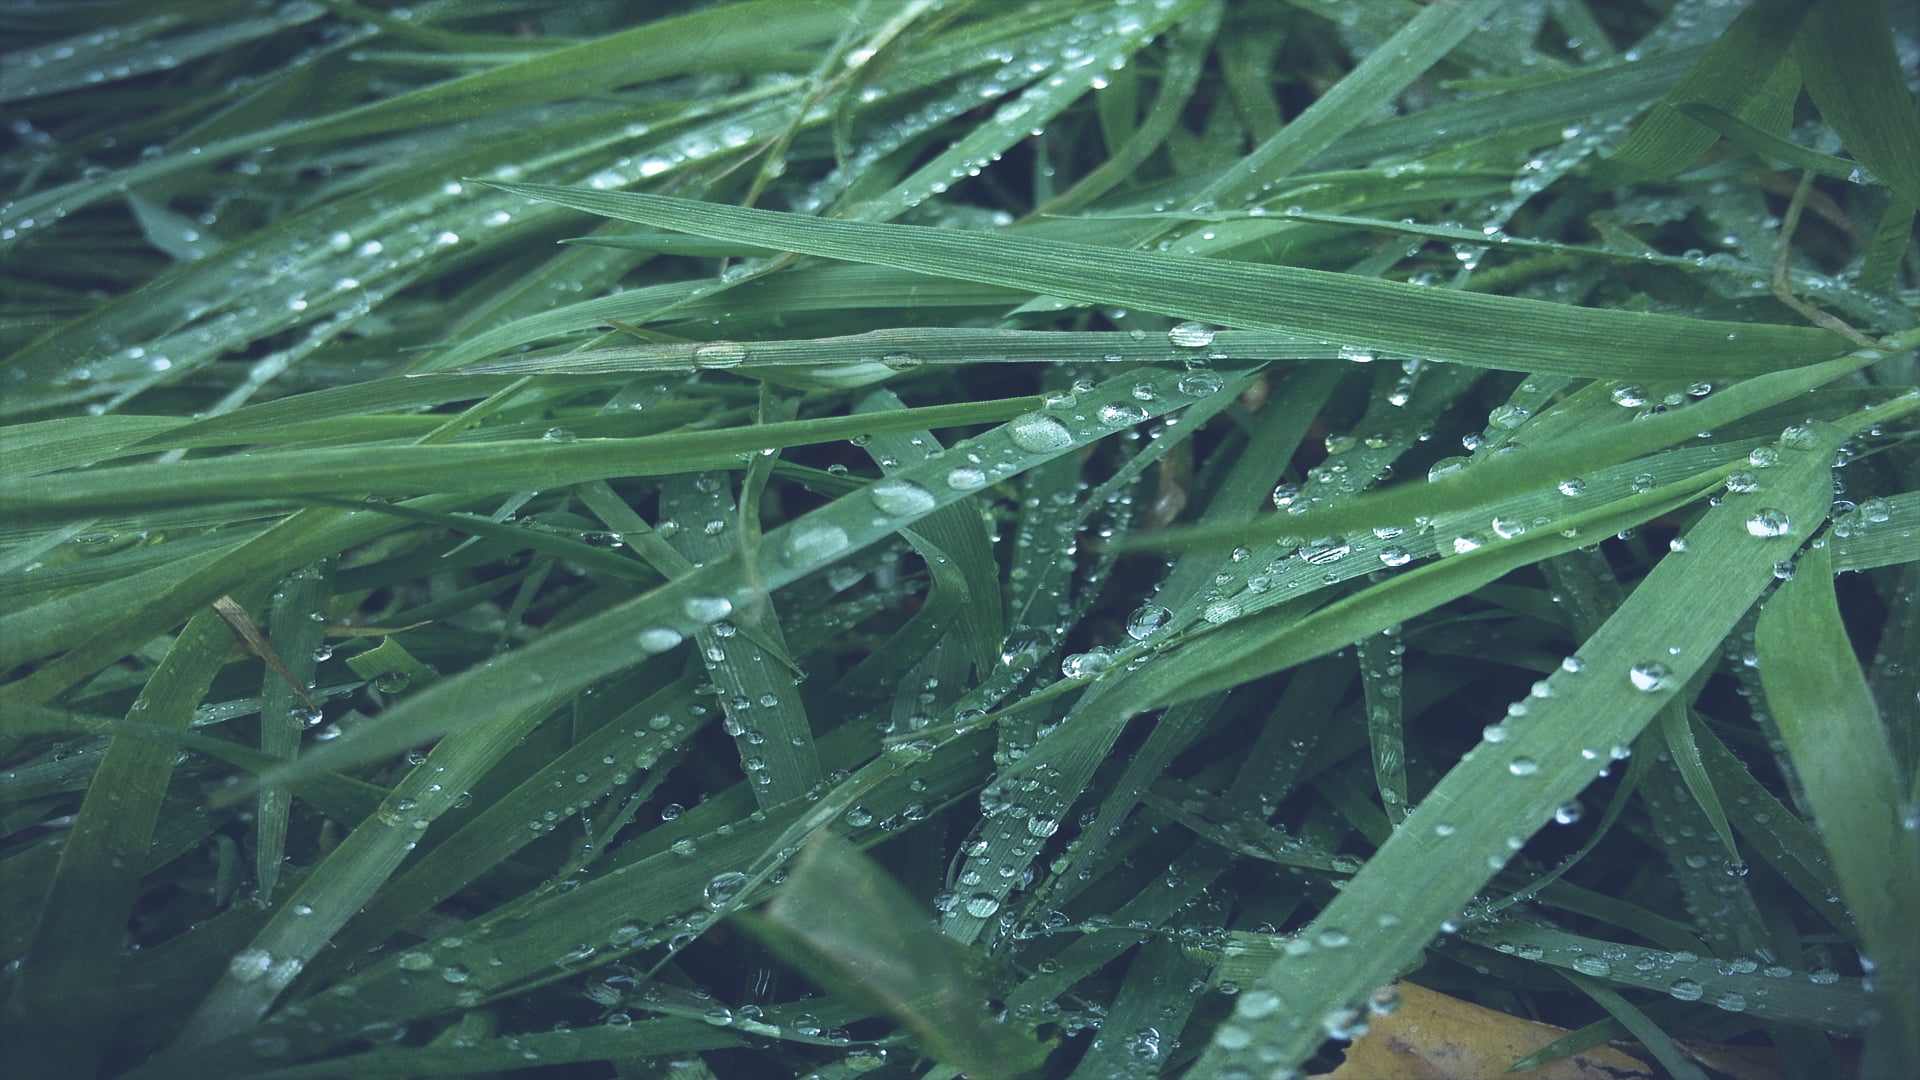 green leafed grass, wet, nature, macro, backgrounds, freshness